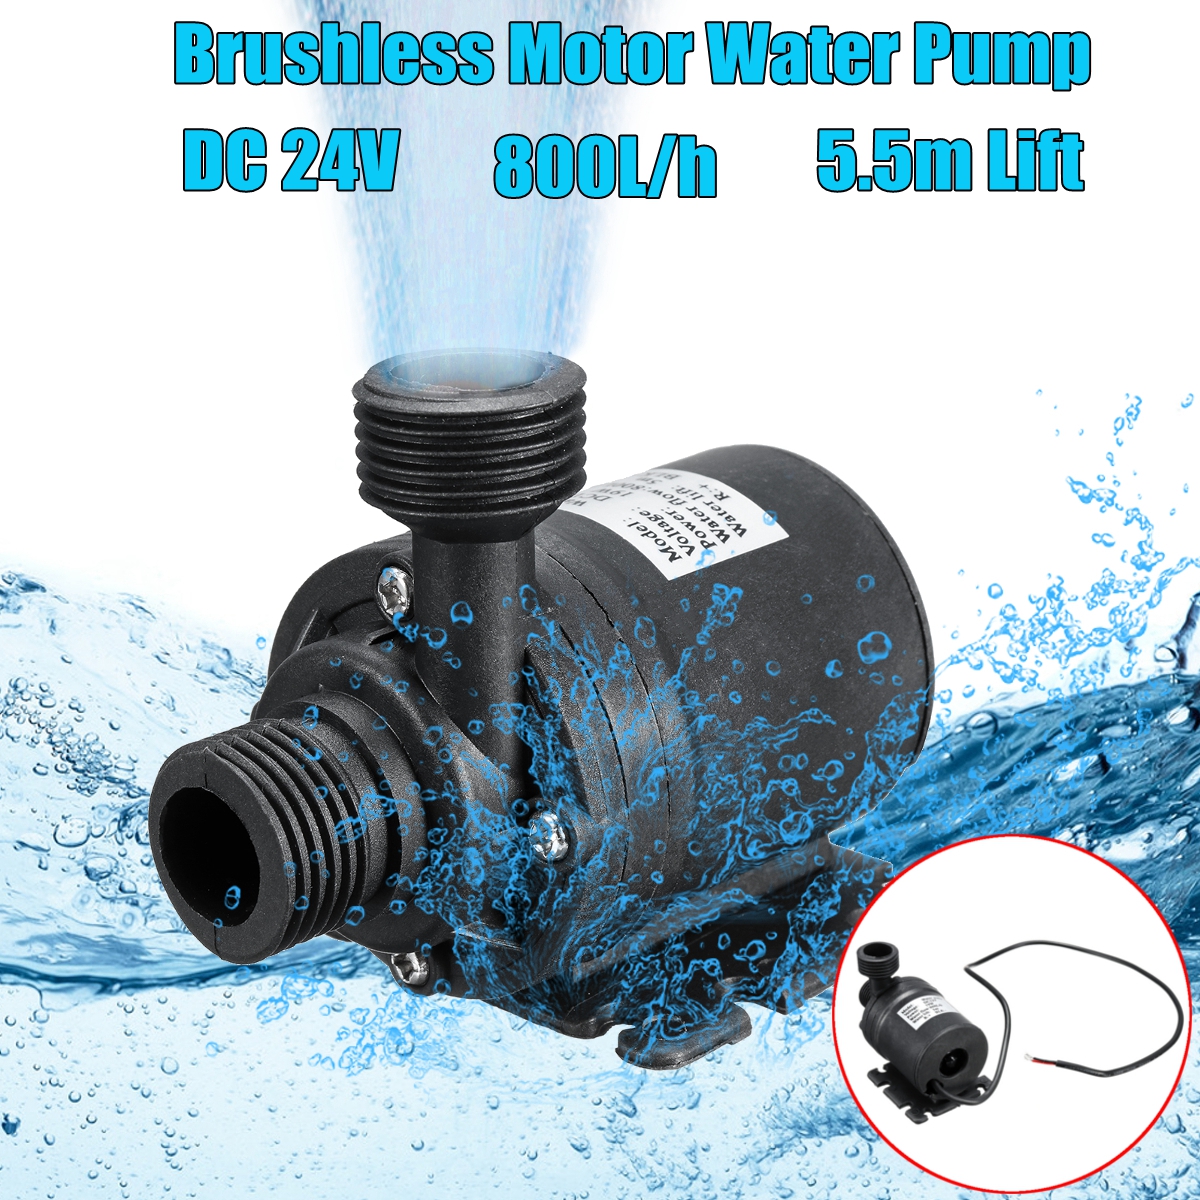 ZYW680-Mini-DC-24V-Water-Pump-Ultra-Quiet-55m-Lift-Brushless-Motor-Submersible-Water-Pump-1531436-3